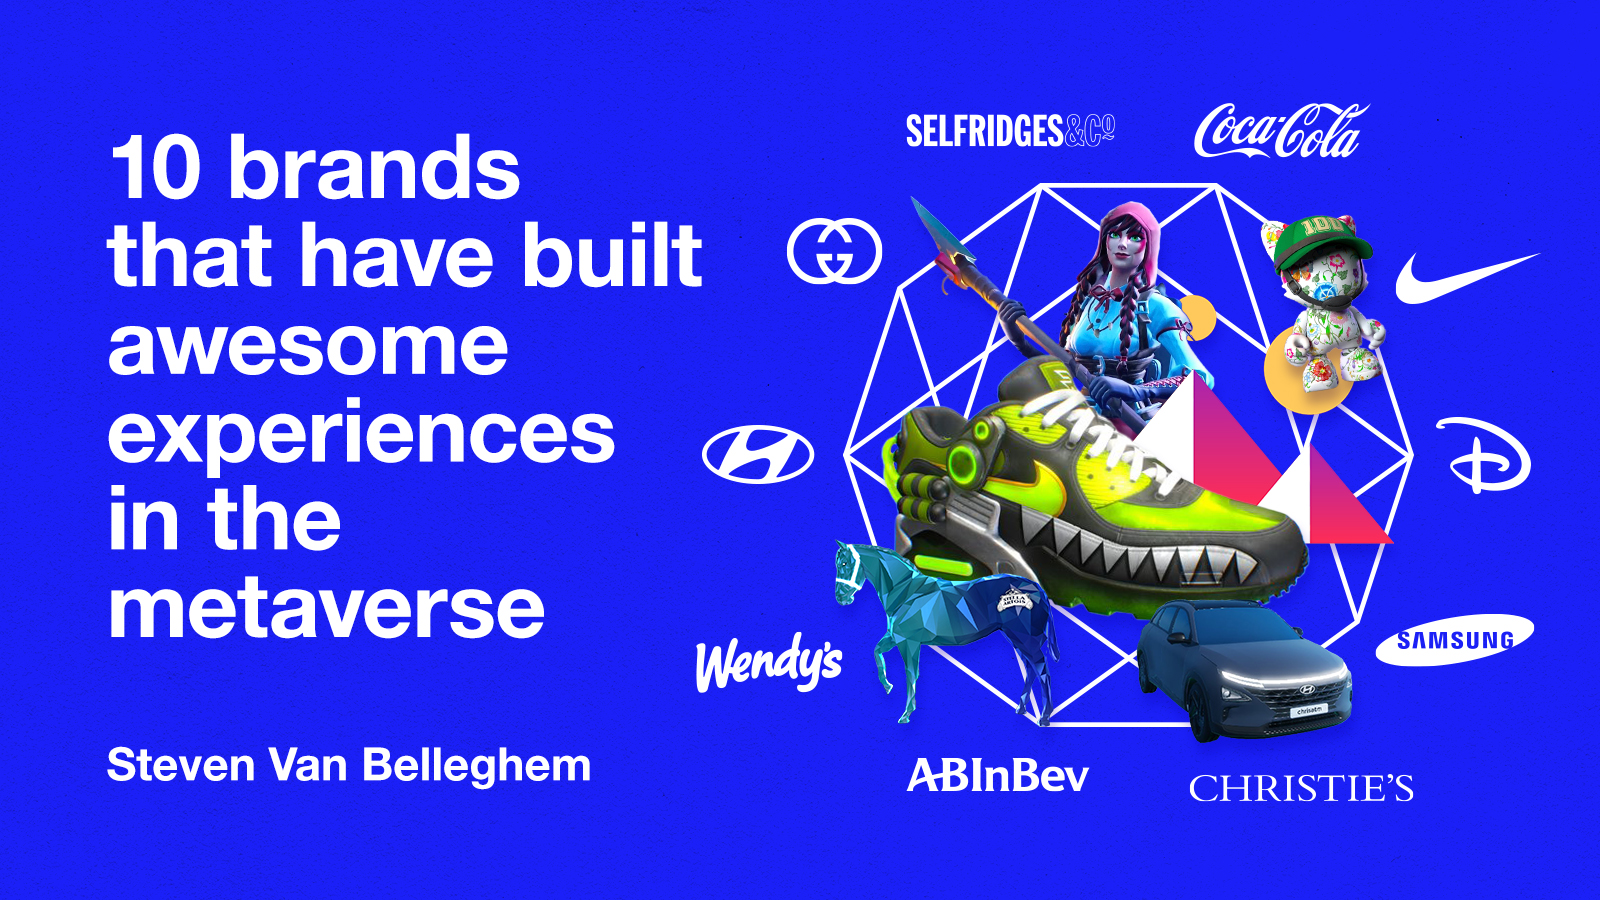 10 brands that have built awesome experiences in the metaverse